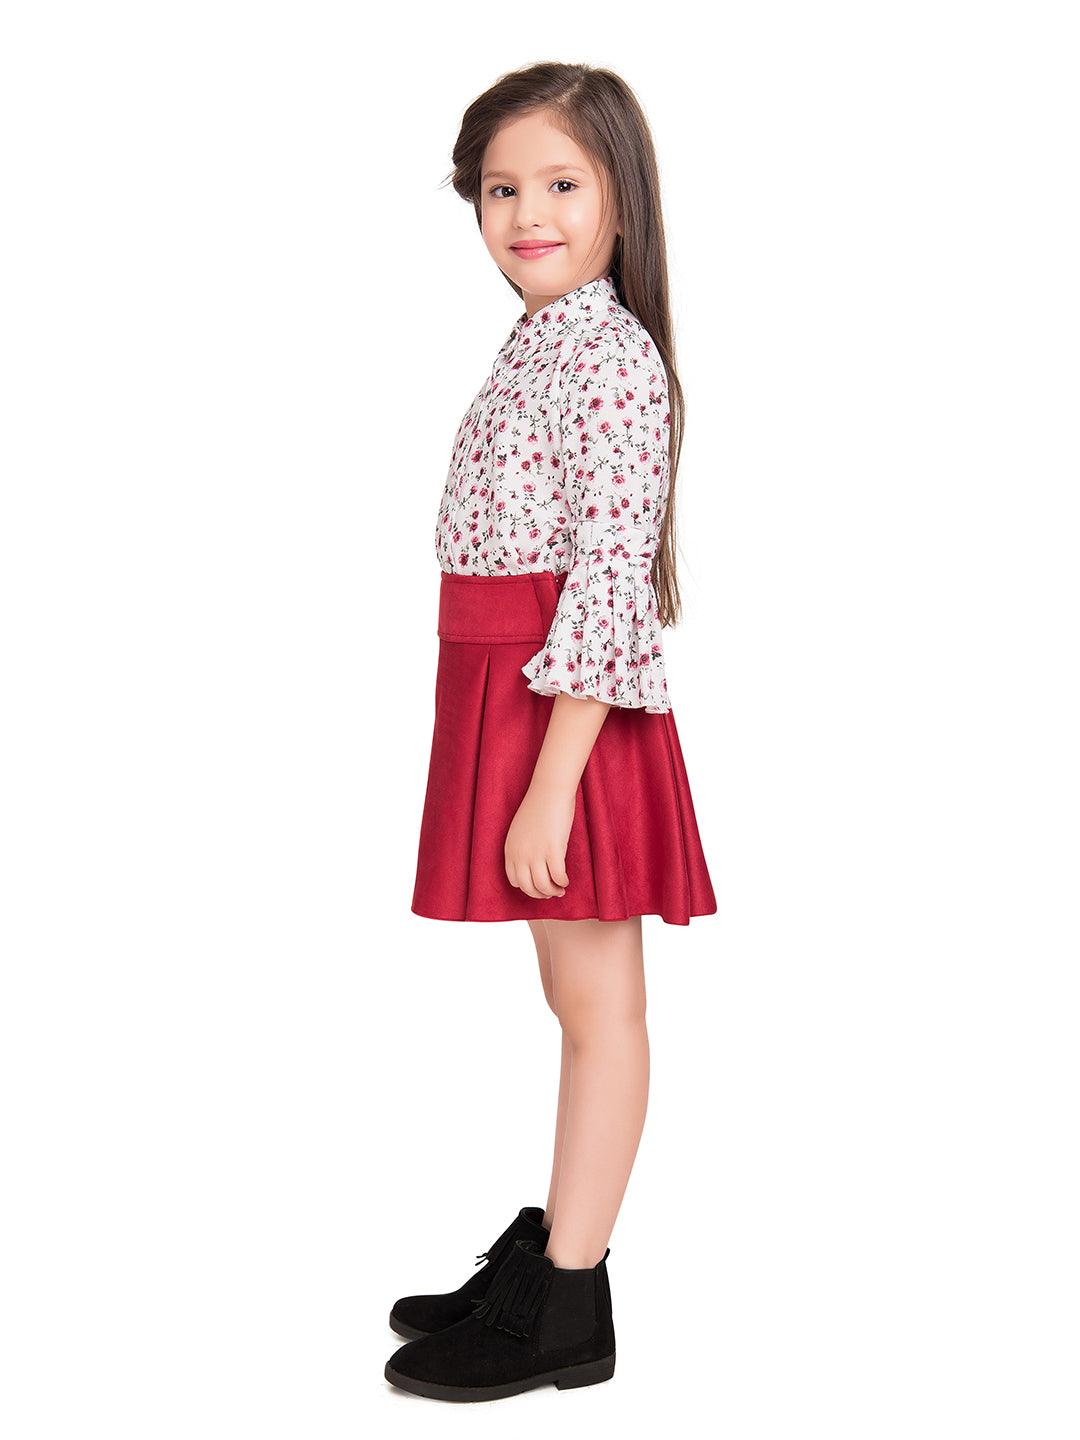 Tiny Baby Cherry Colored Skirt Set - 2040 - TINY BABY INDIA shop.tinybaby.in